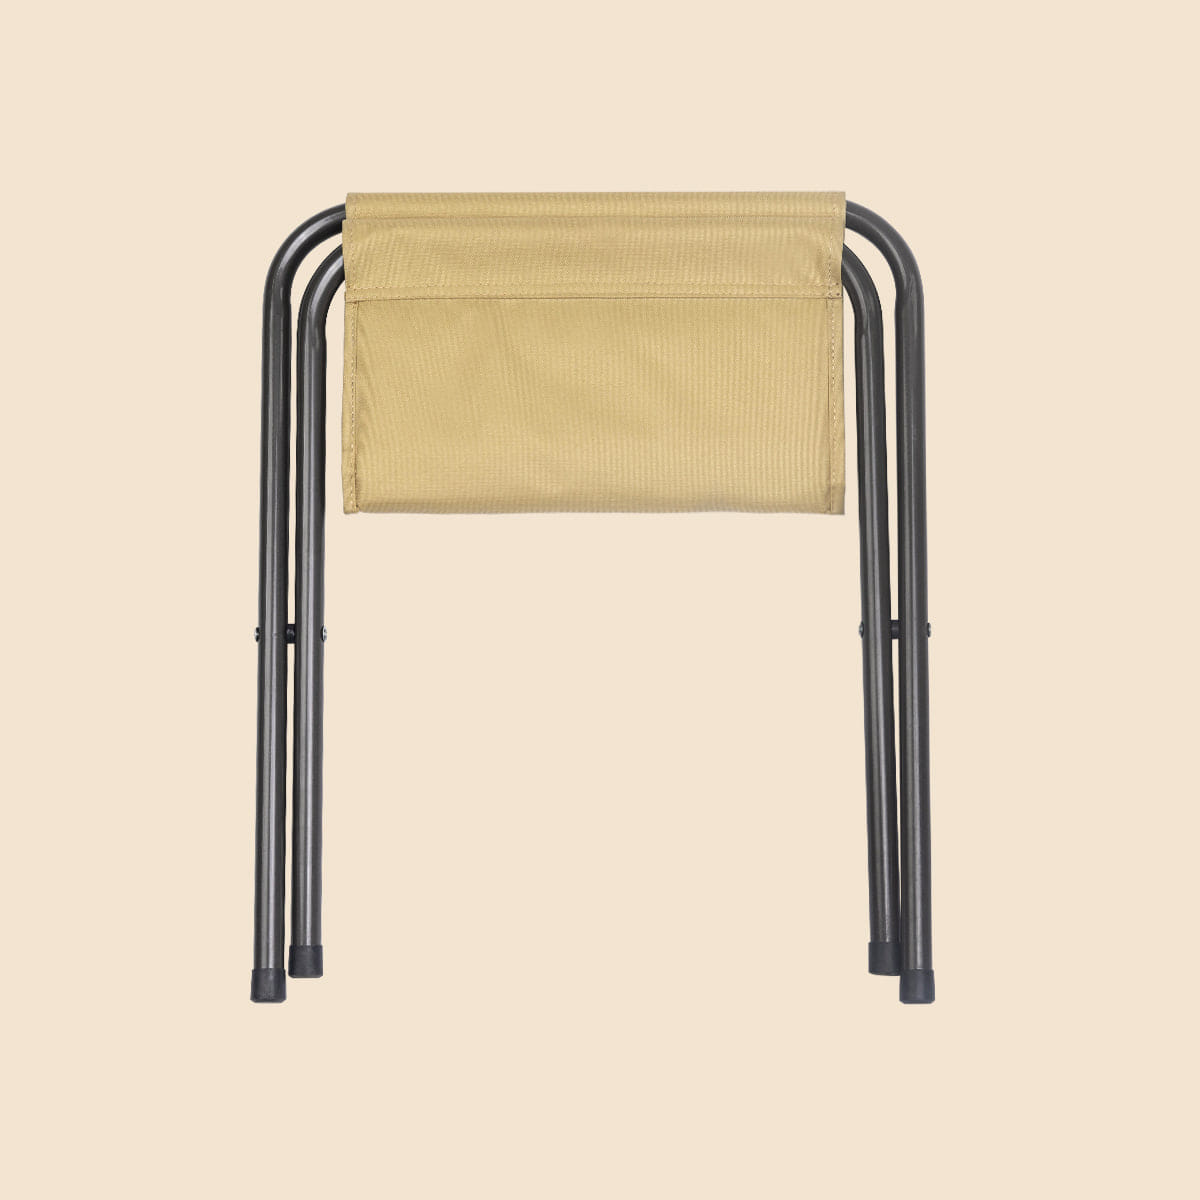 Cargo Container Wide BBQ Chair 2pcs - Khaki